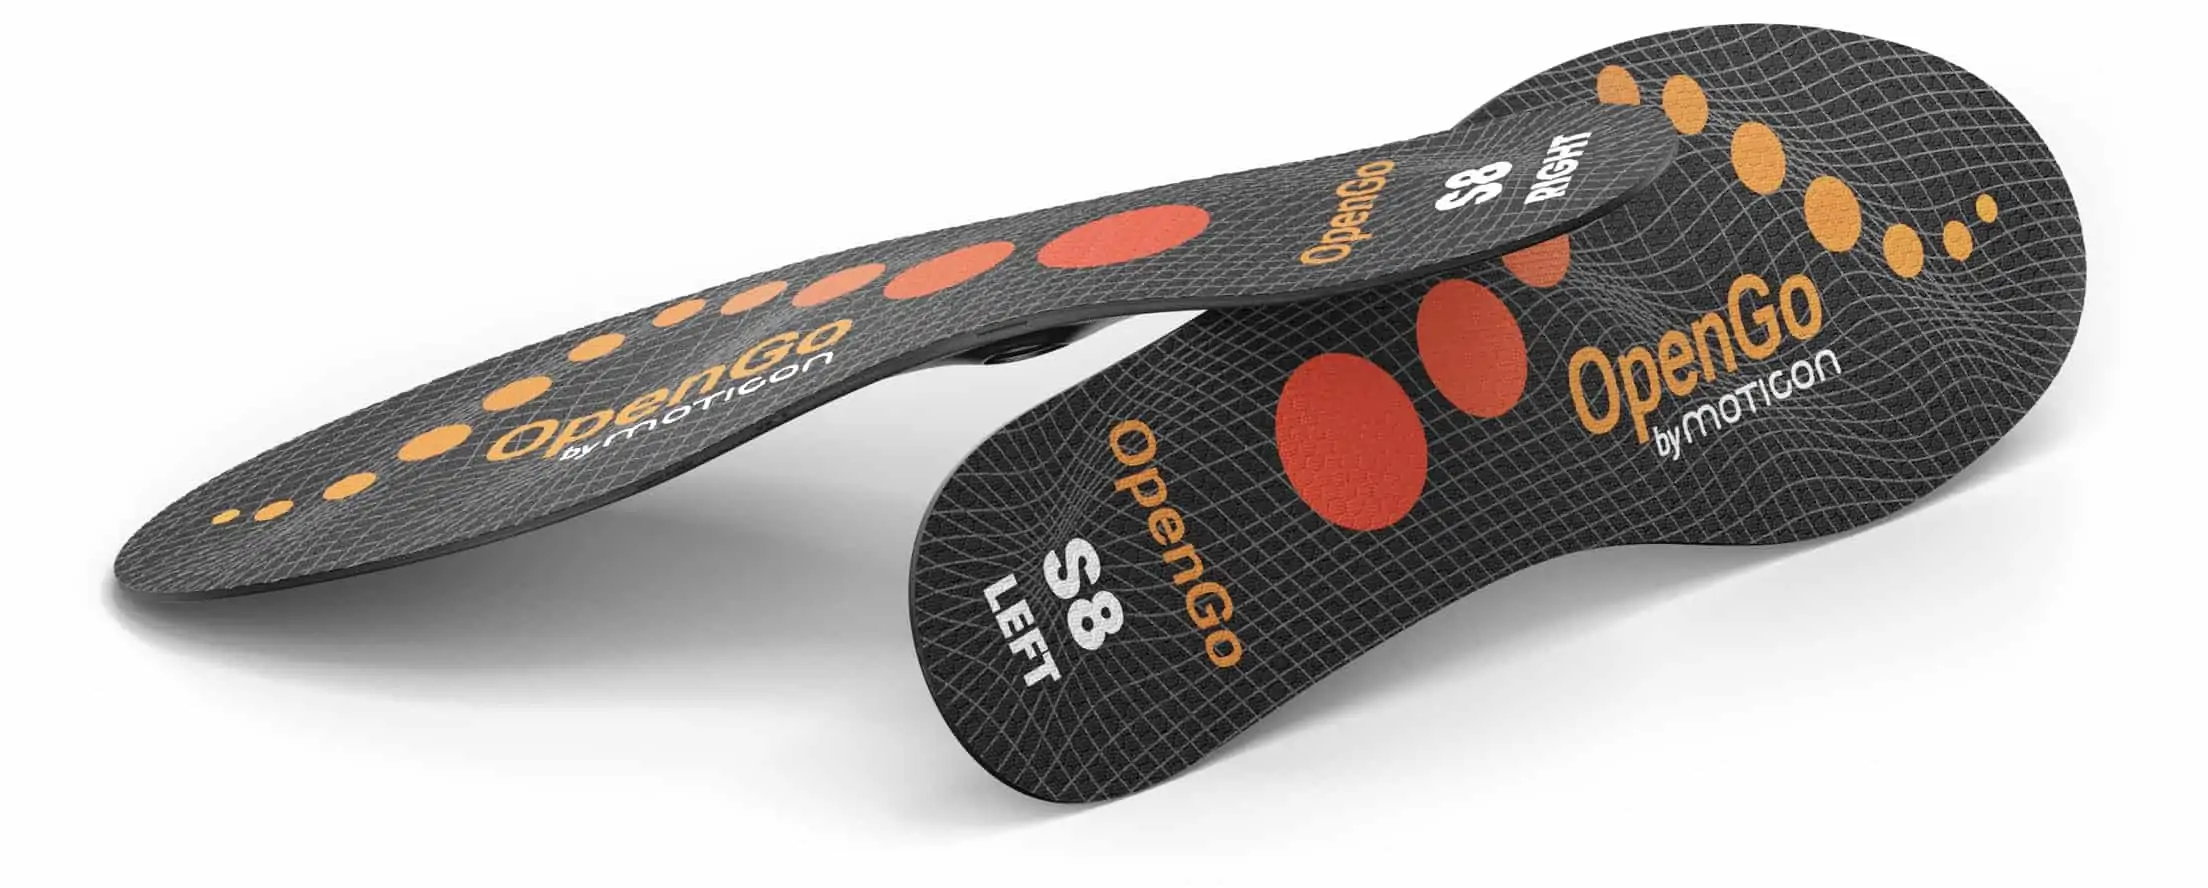 moticon-opengo-sensor-insoles-stacked-sizes